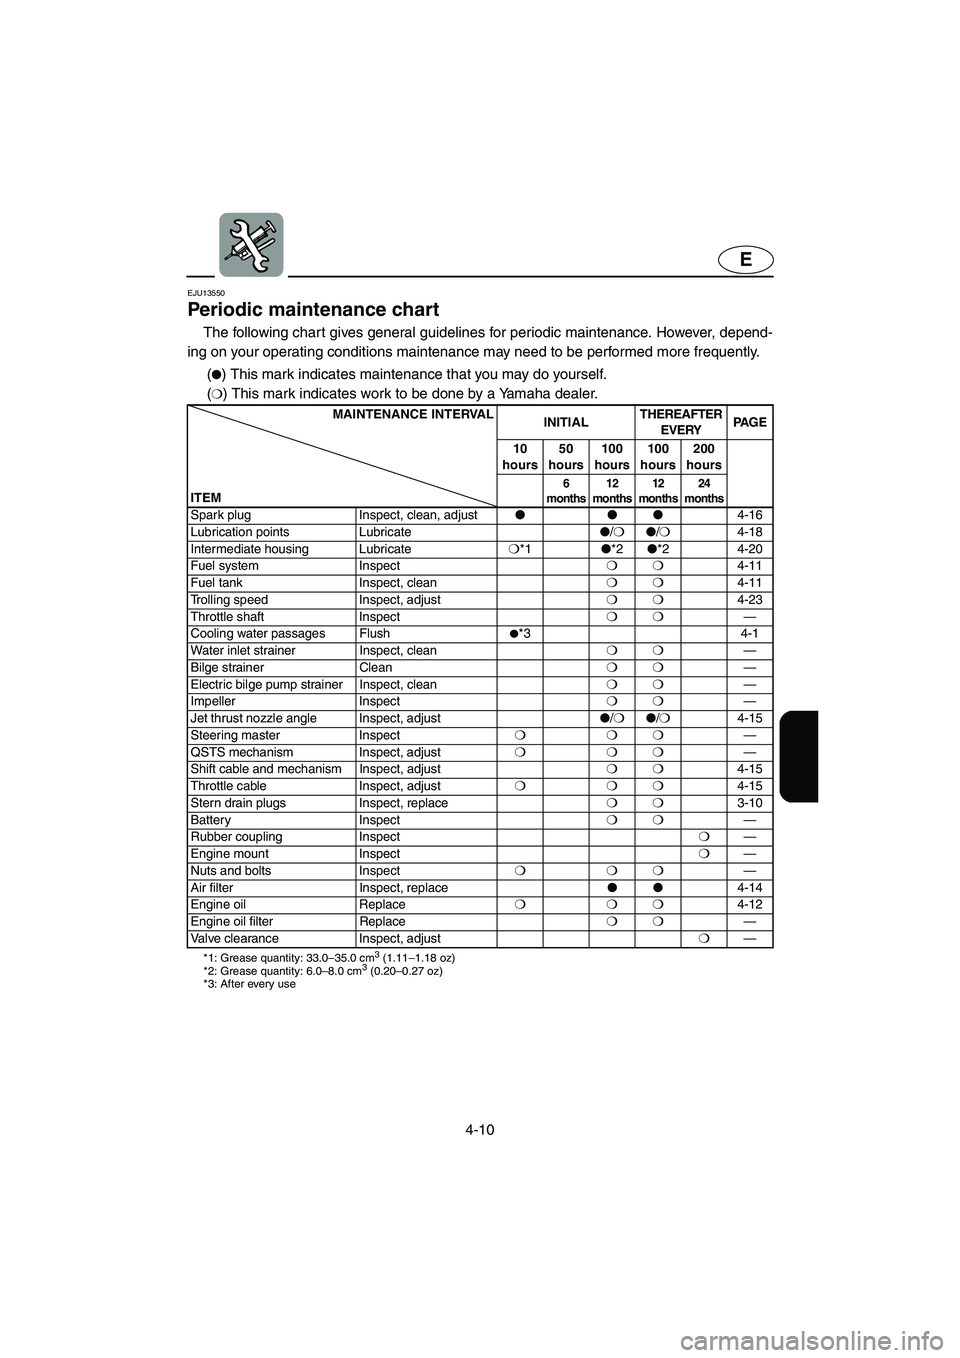 YAMAHA FX HO 2006  Owners Manual 4-10
E
EJU13550 
Periodic maintenance chart 
The following chart gives general guidelines for periodic maintenance. However, depend-
ing on your operating conditions maintenance may need to be perform